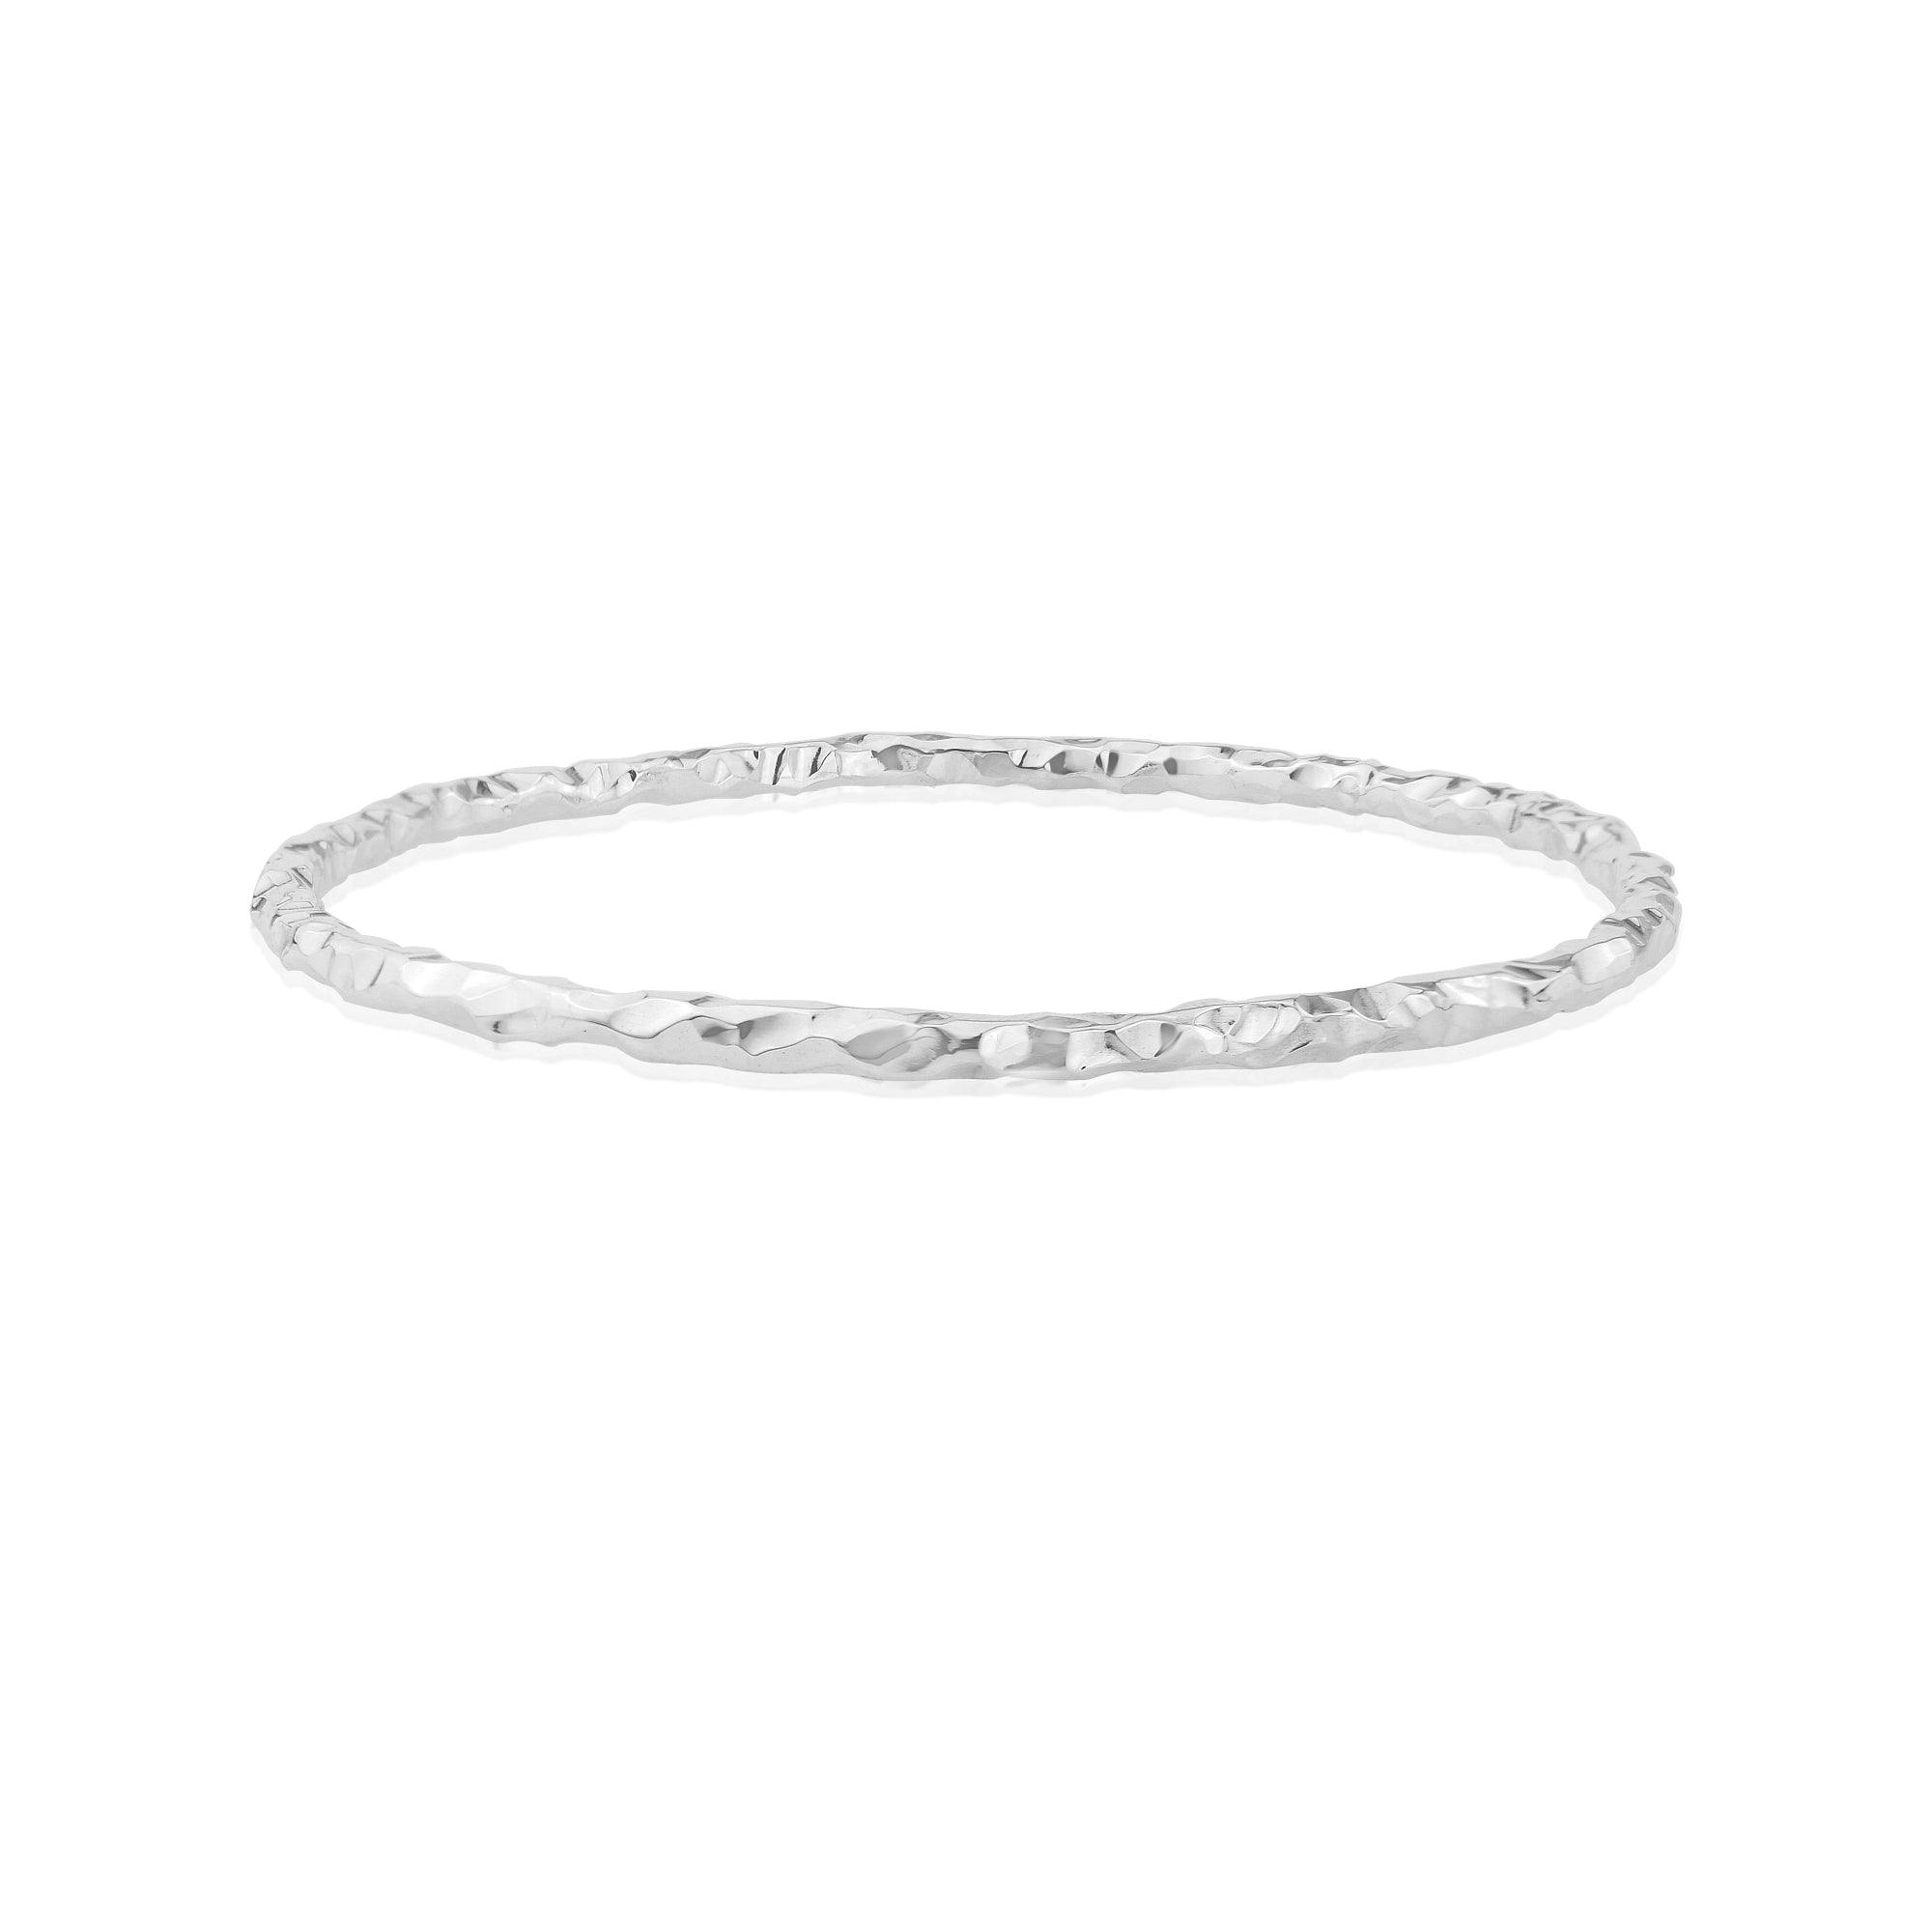 Silver Heavy Chopped Textured Bangle